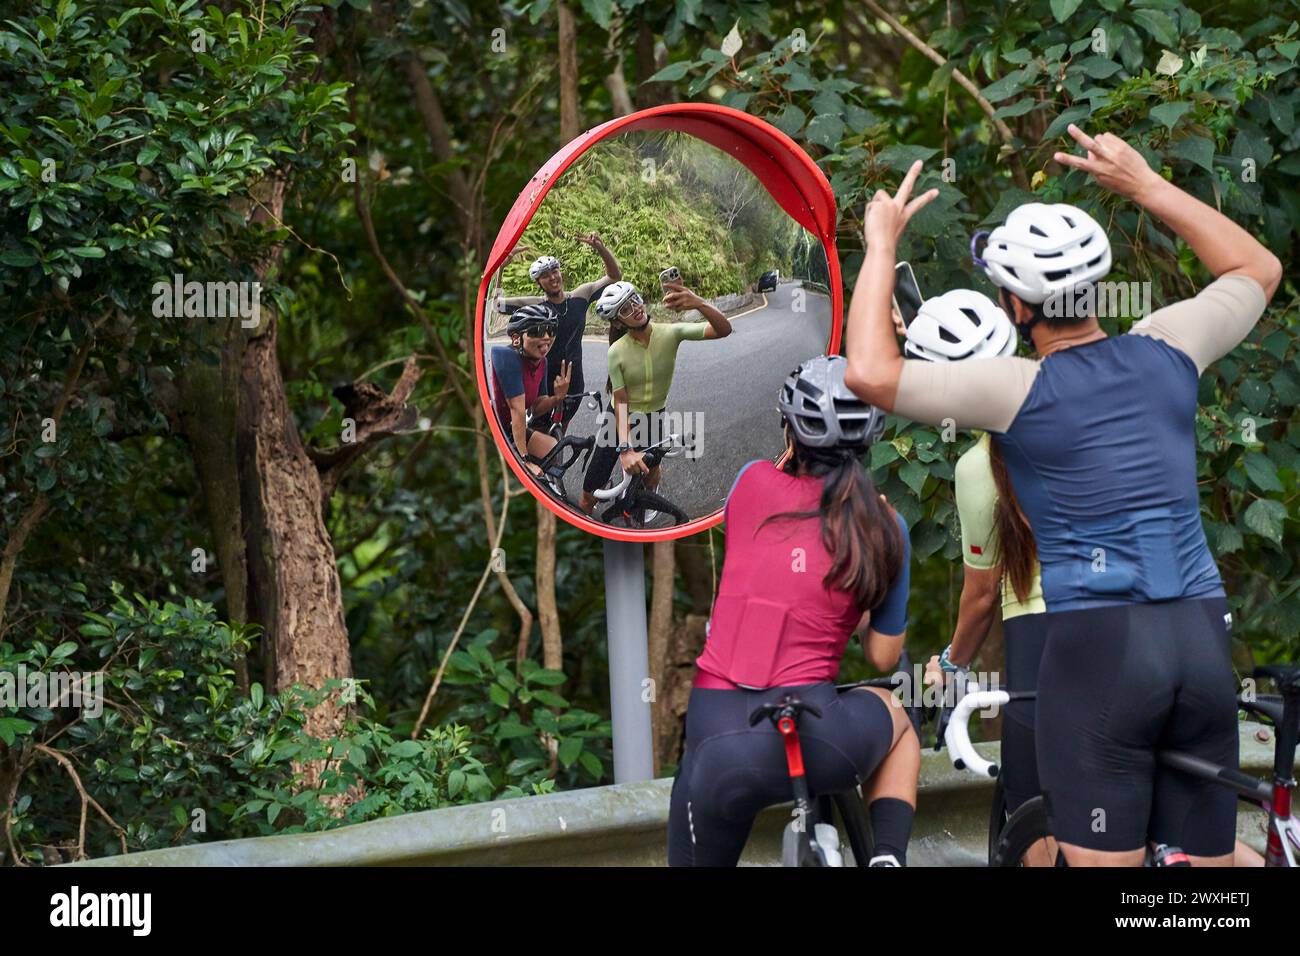 group of three young asian cyclists taking a funny selfie together outdoors on rural road Stock Photo